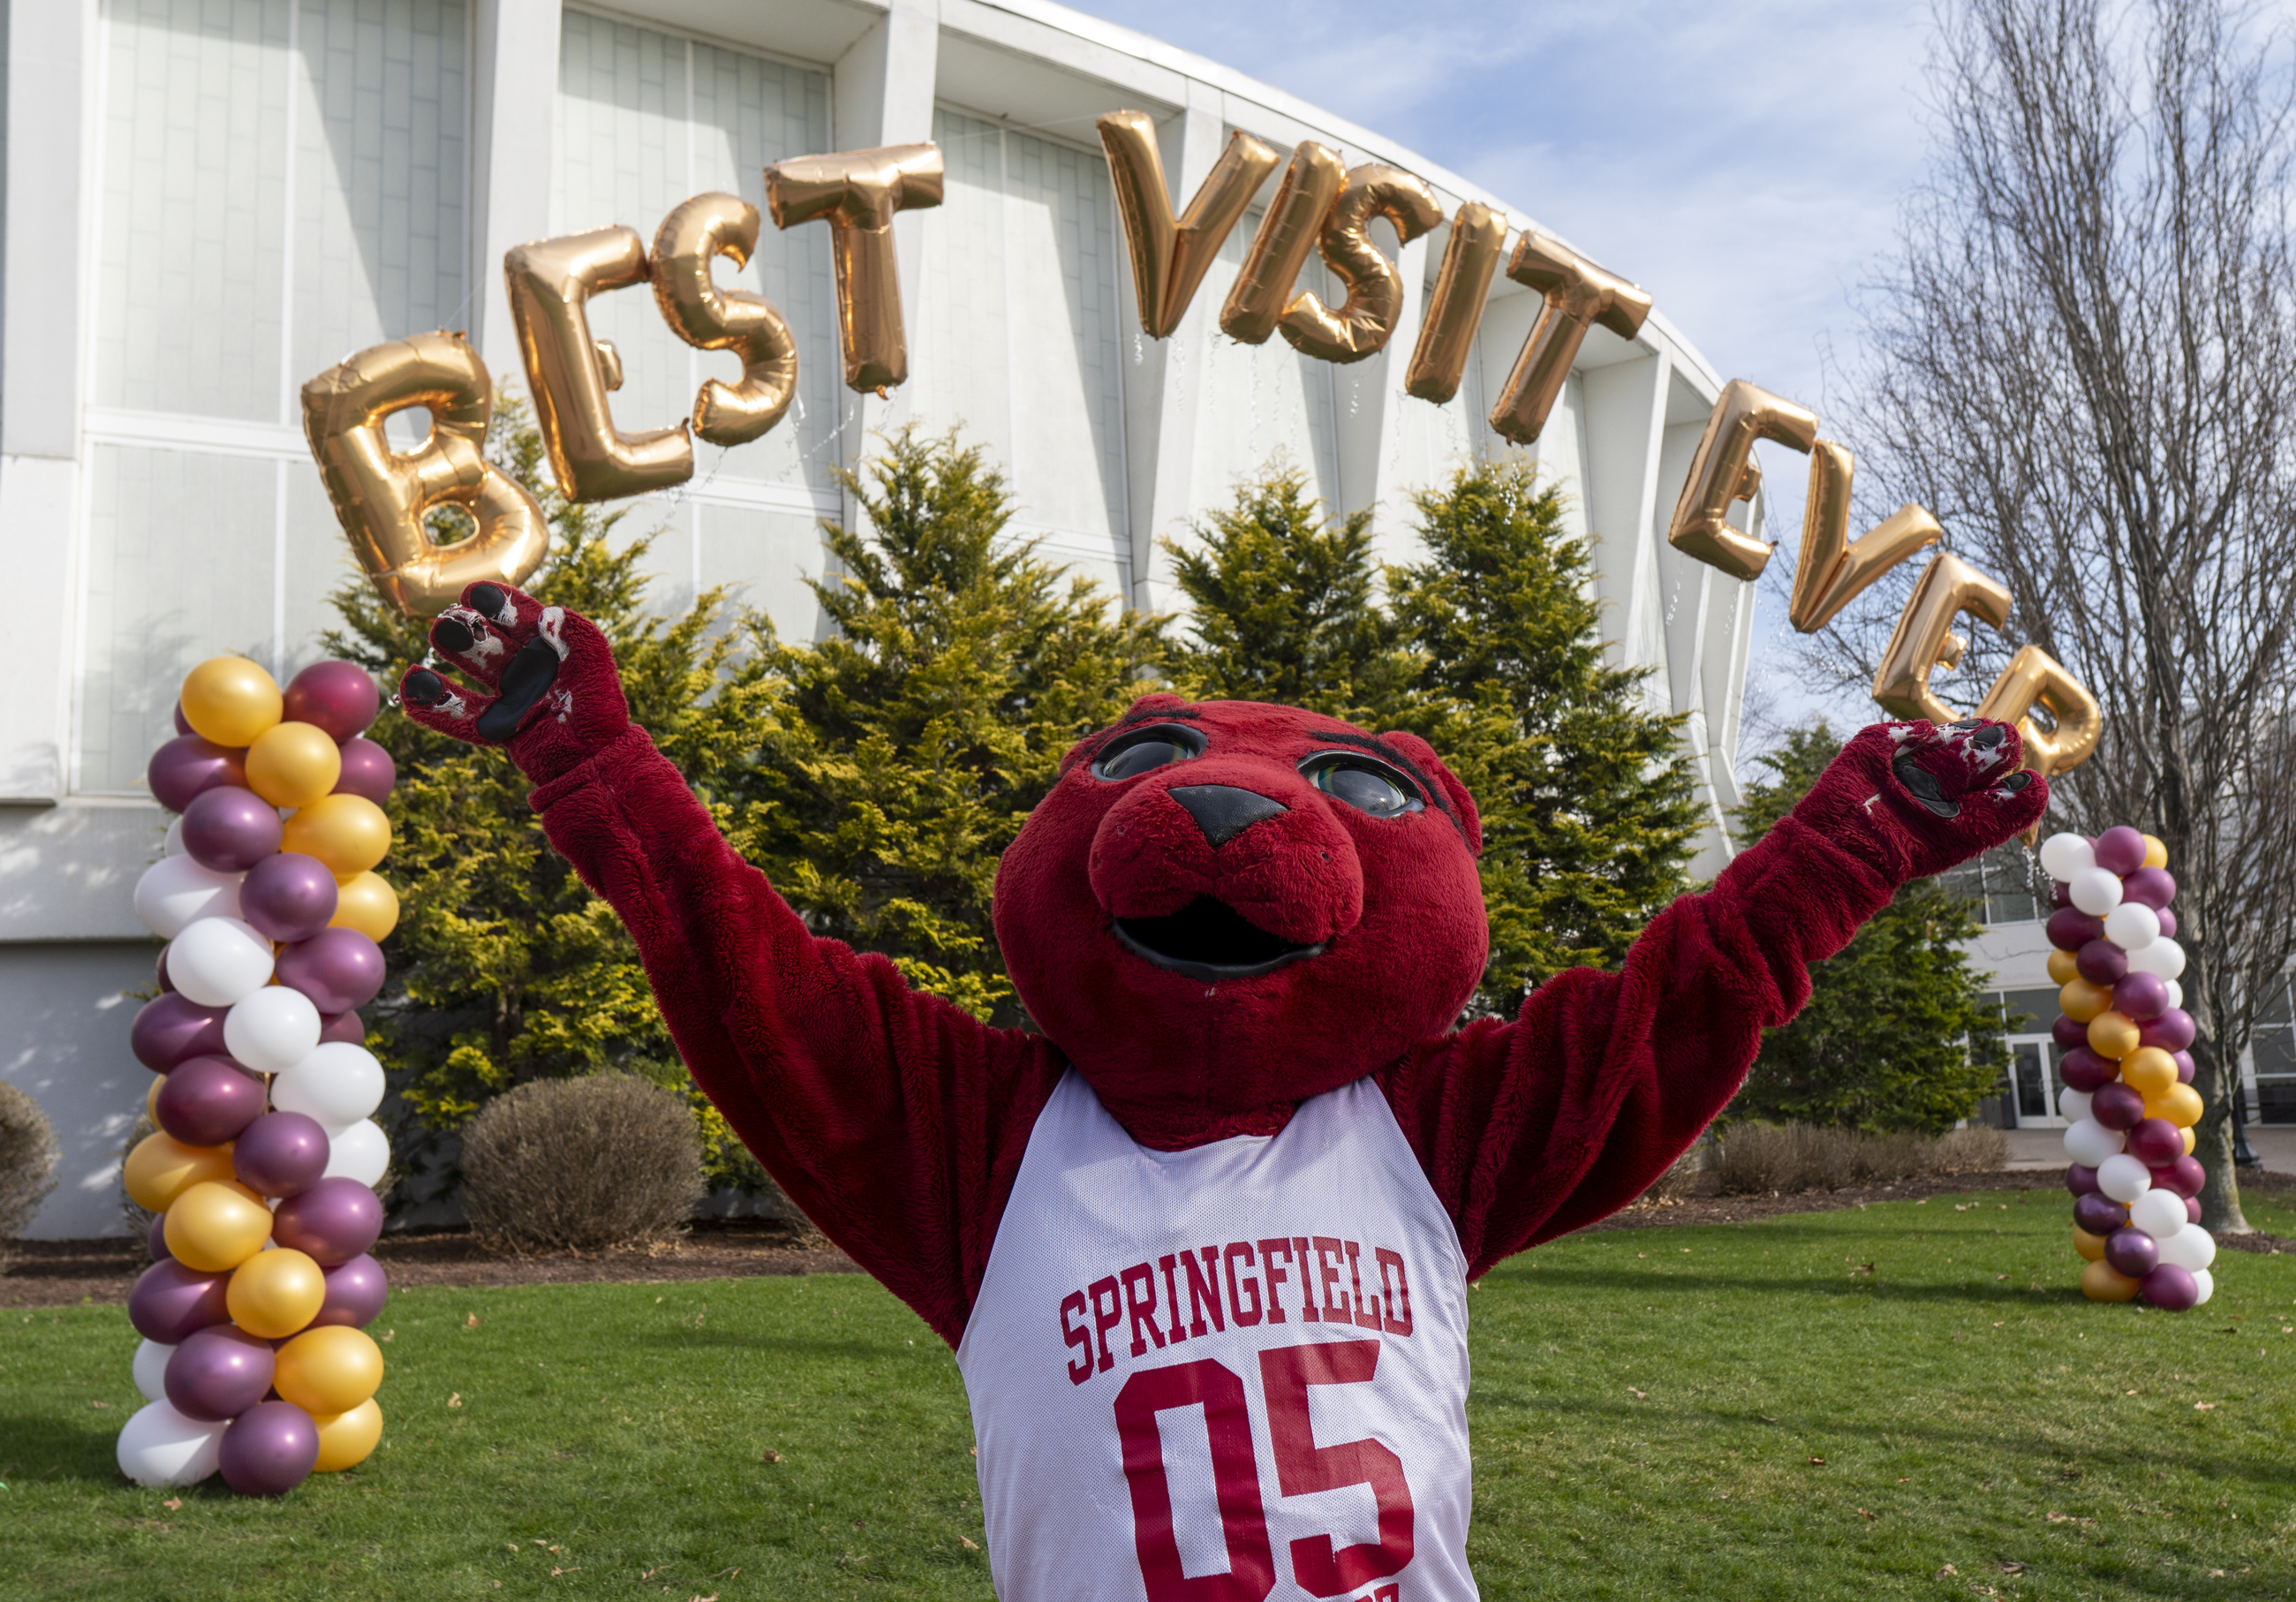 Springfield College - Tour welcomes students